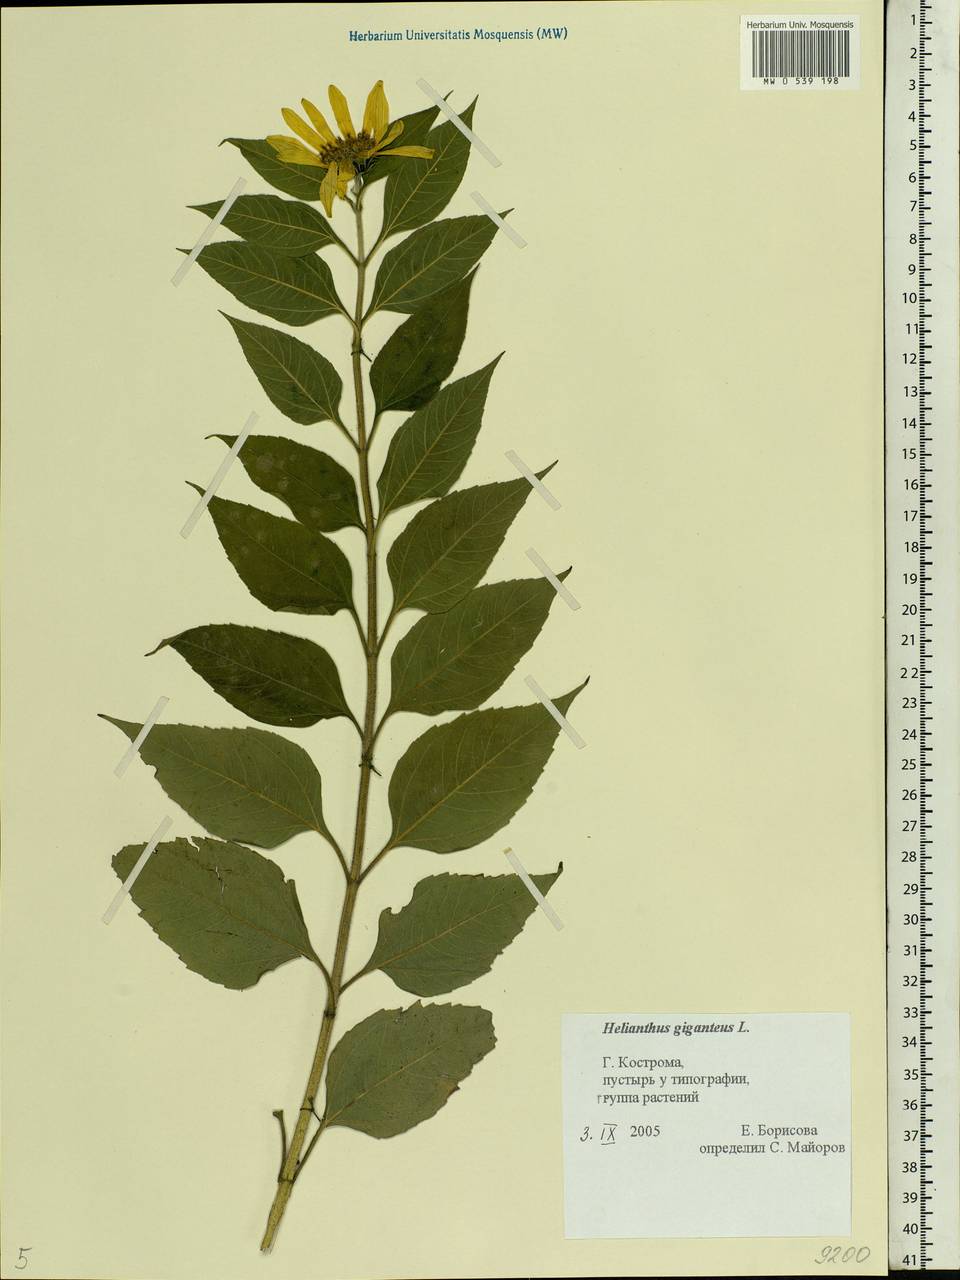 Helianthus giganteus L., Eastern Europe, Central forest region (E5) (Russia)